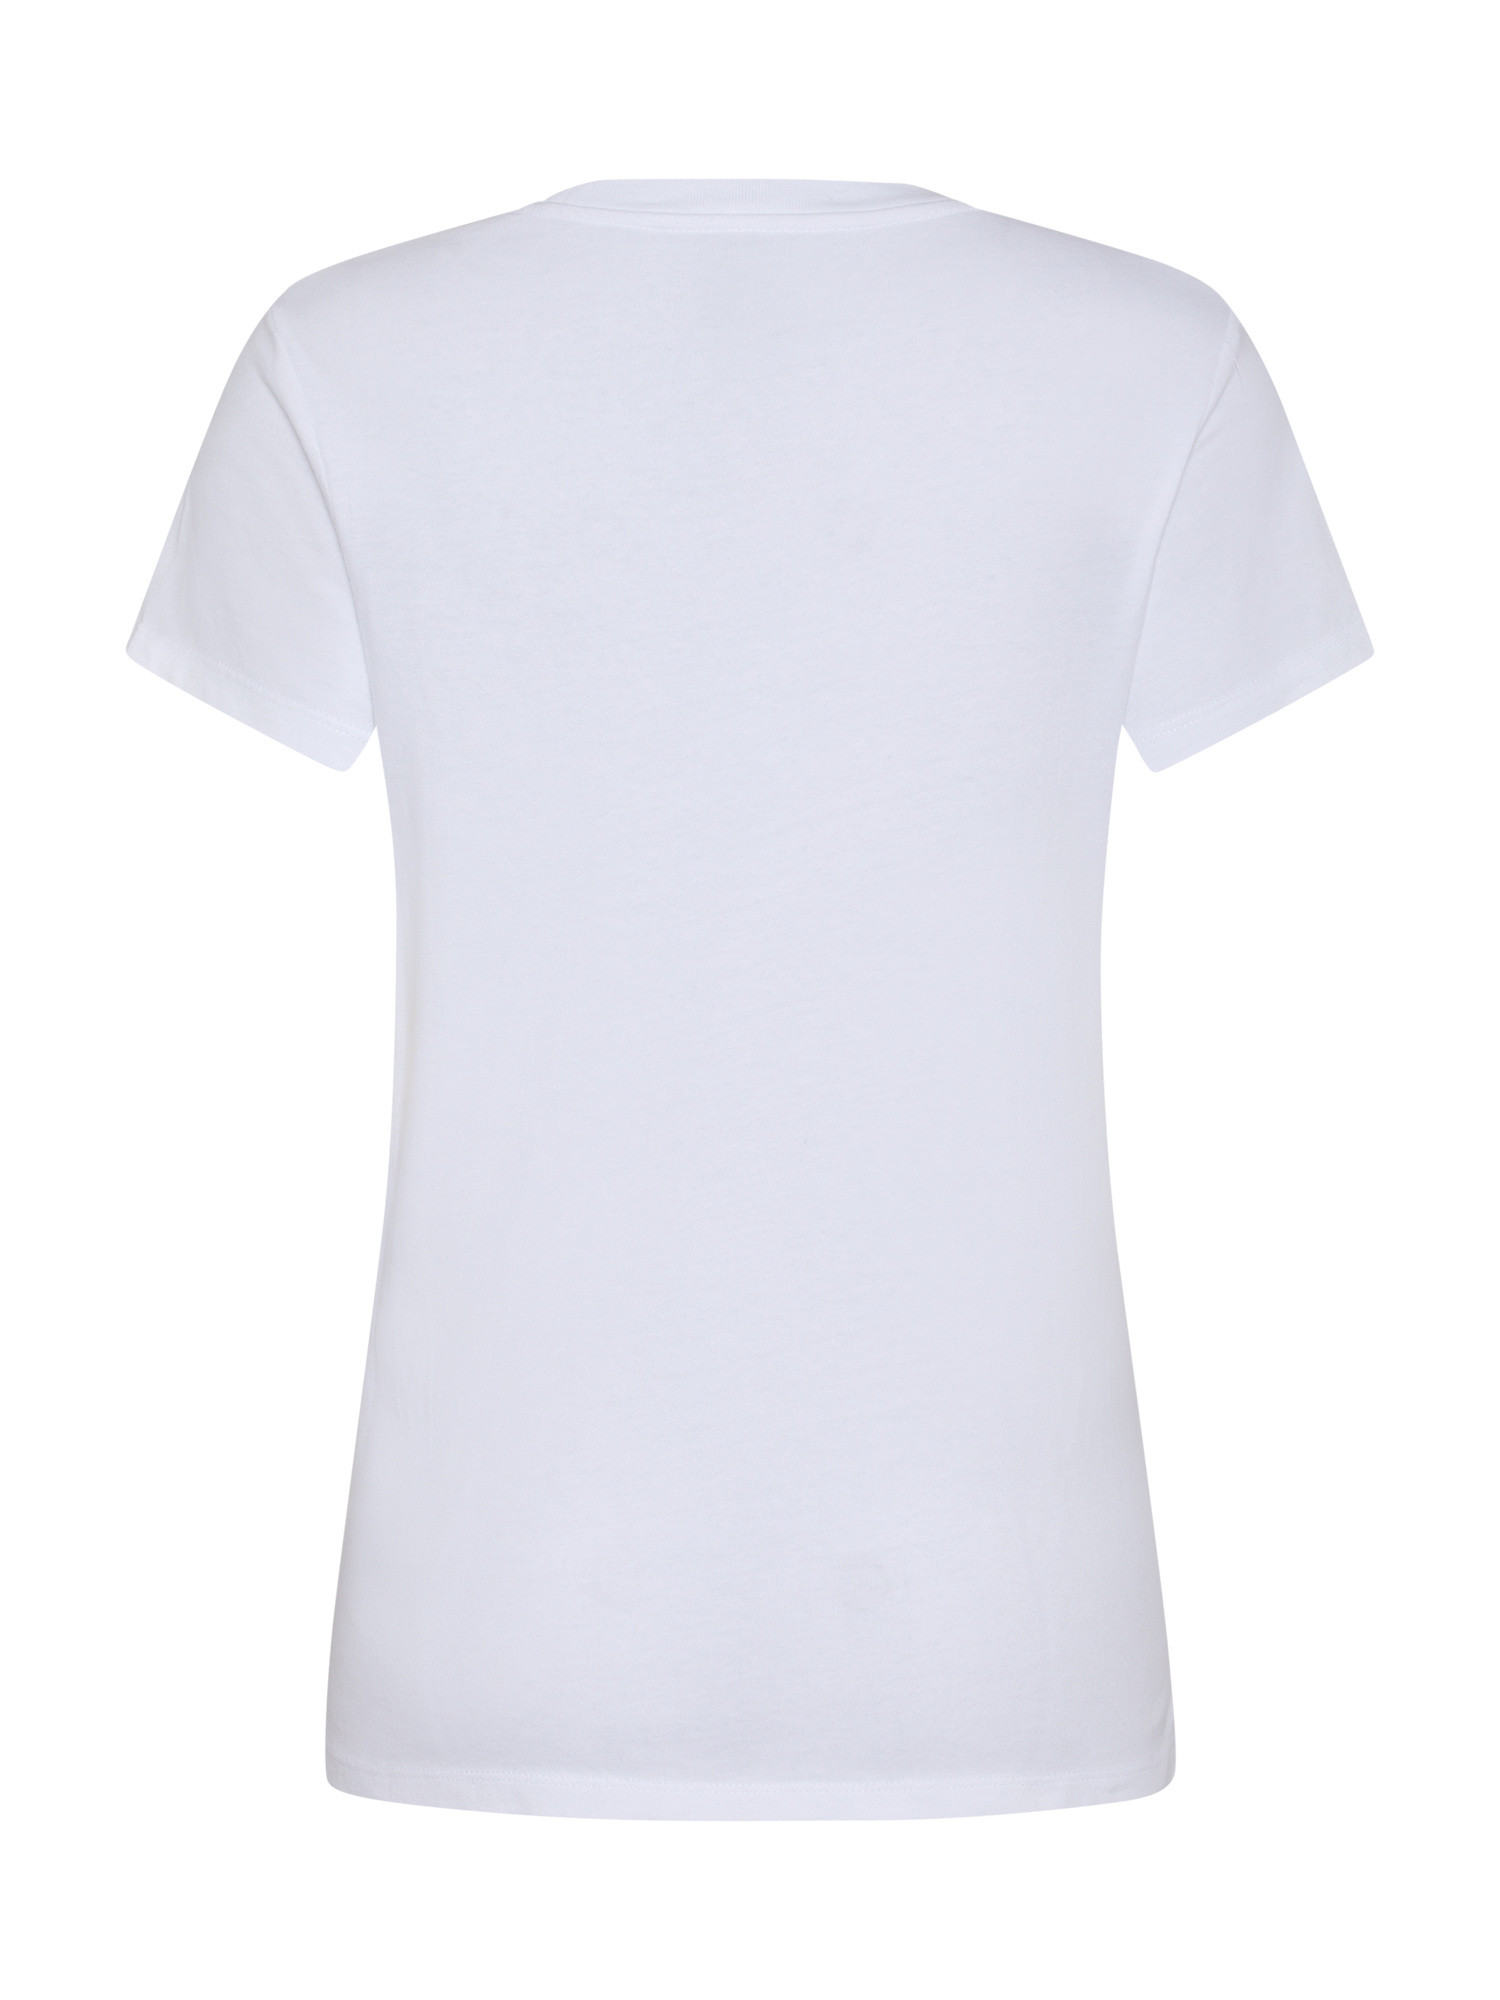 Levi's - Cotton T-shirt with logo, White, large image number 1